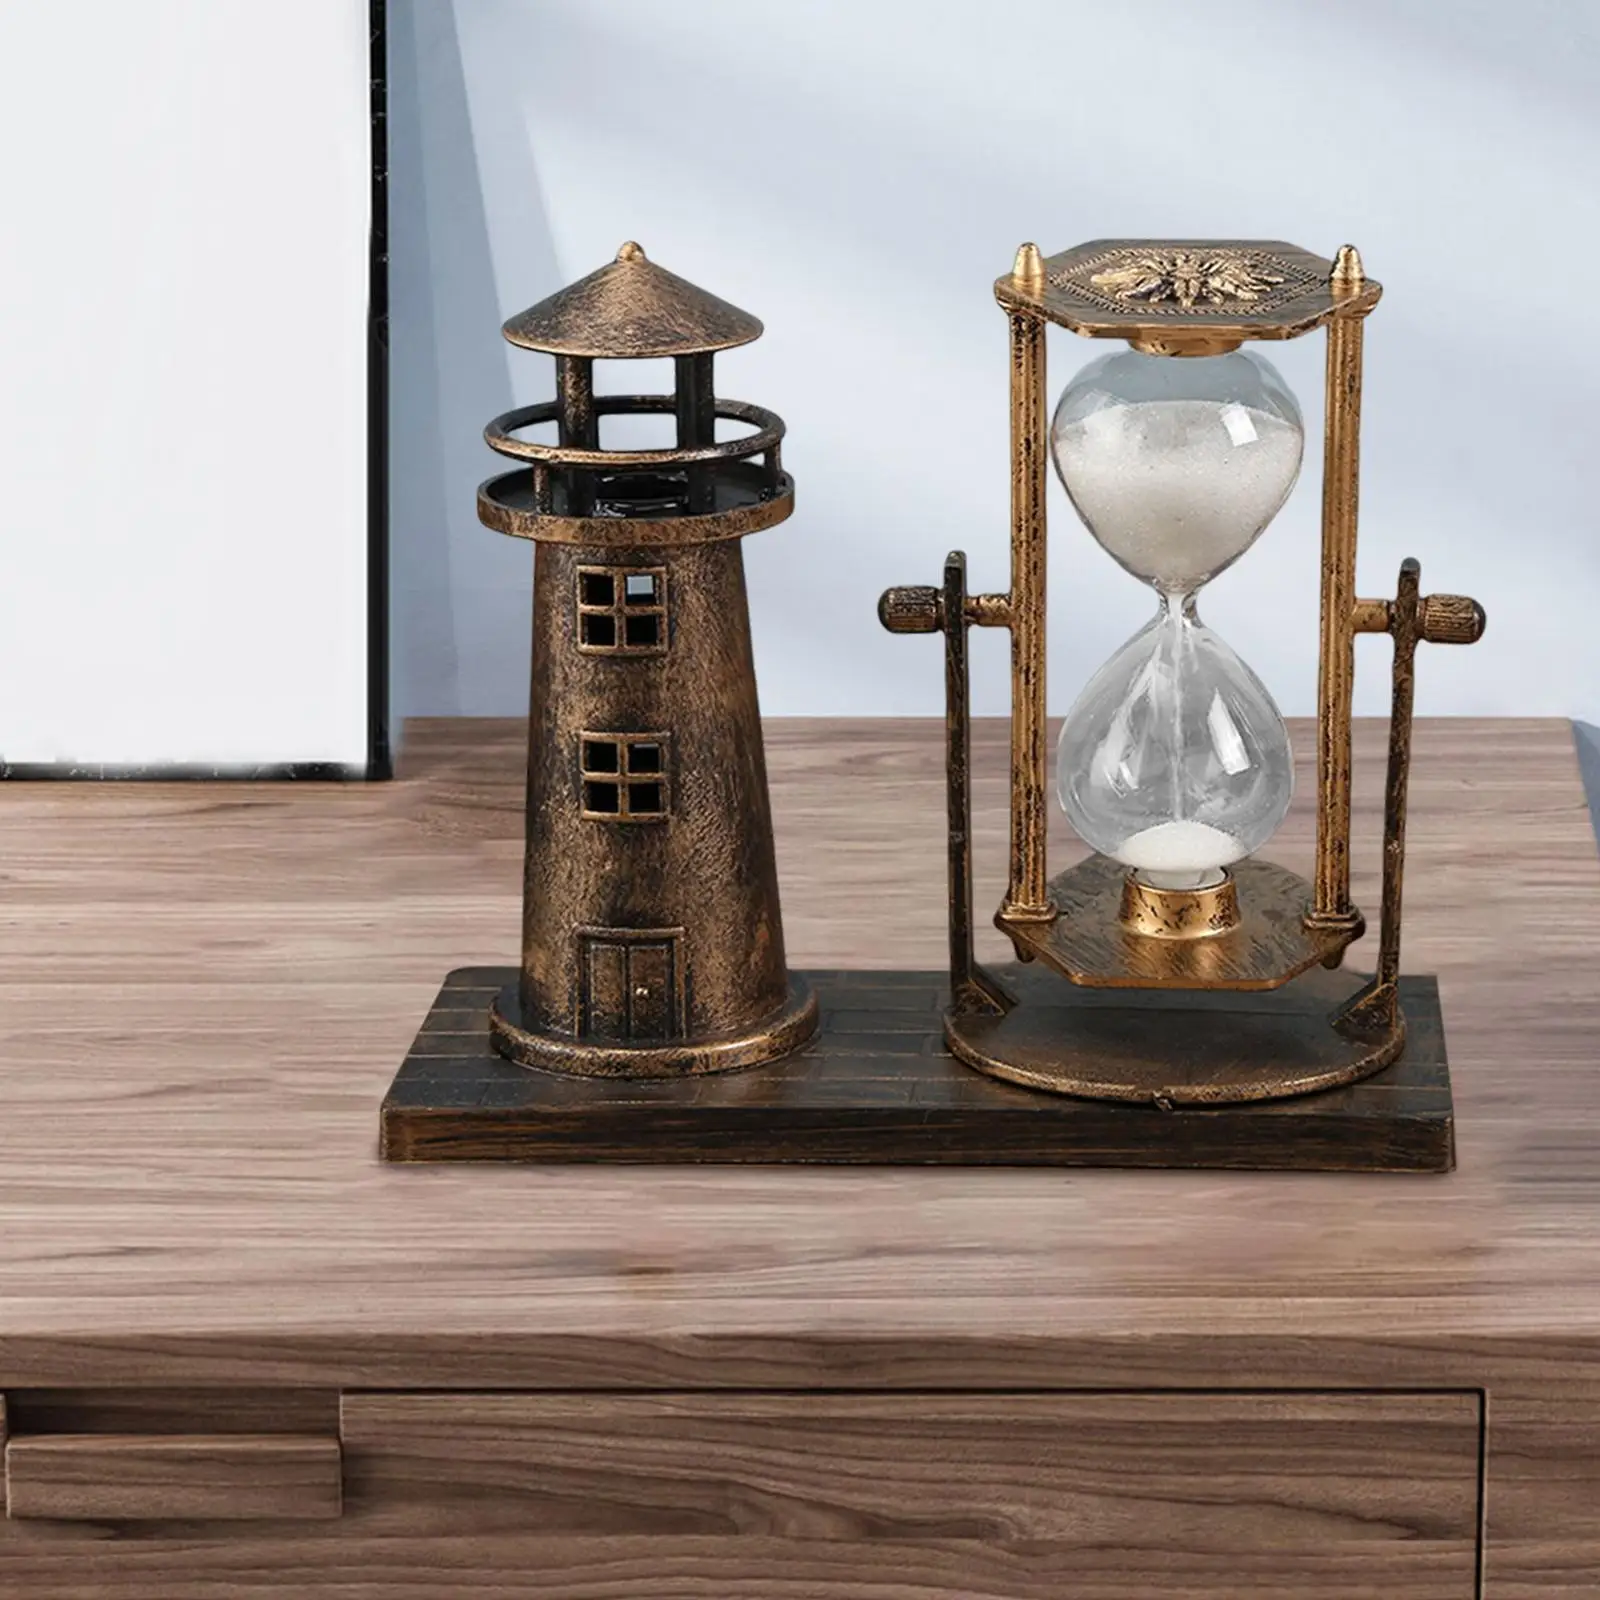 Lighthouse Hourglass Timer Decorations Table Centerpiece Sculpture Ornaments Watchtower for Tabletop Office Housewarming Gift